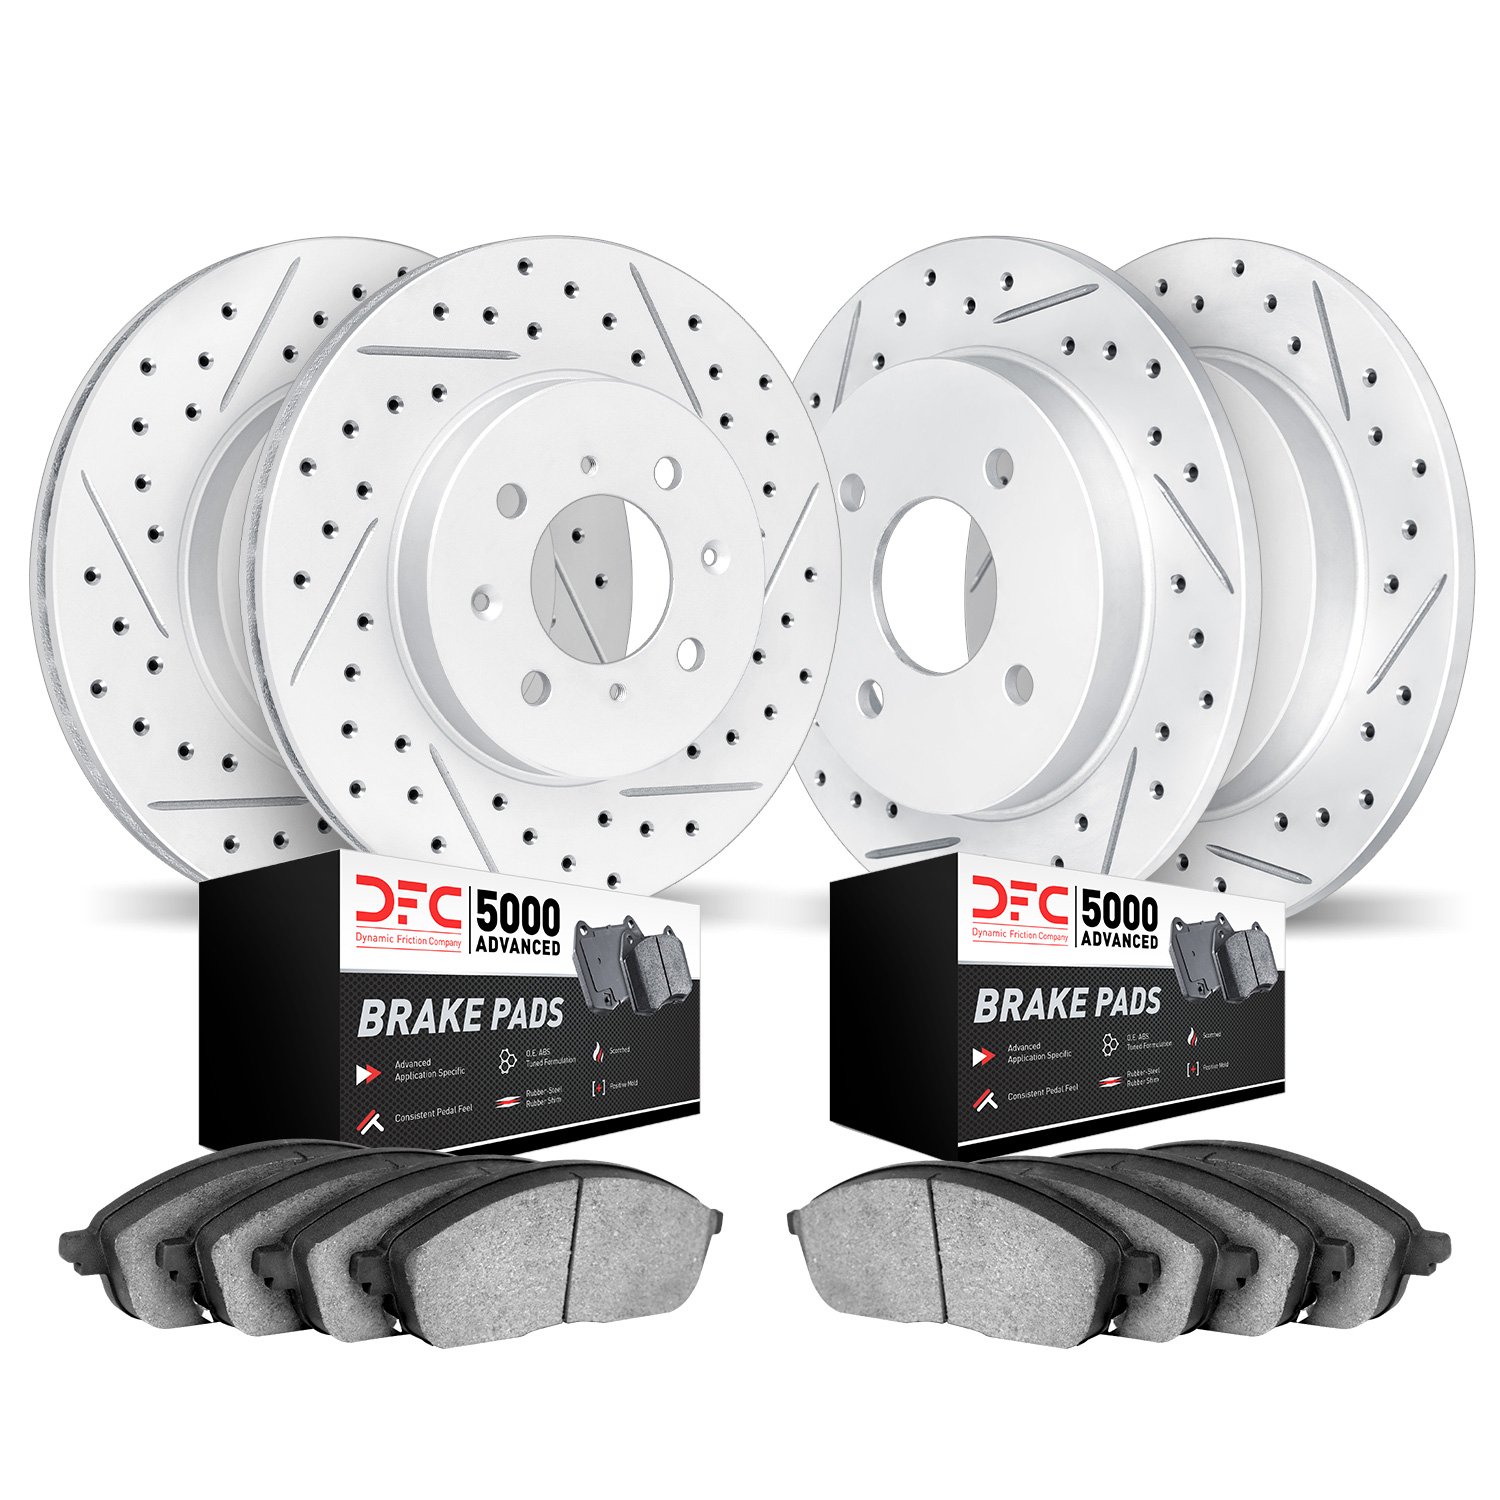 2504-27001 Geoperformance Drilled/Slotted Rotors w/5000 Advanced Brake Pads Kit, 2000-2004 Volvo, Position: Front and Rear